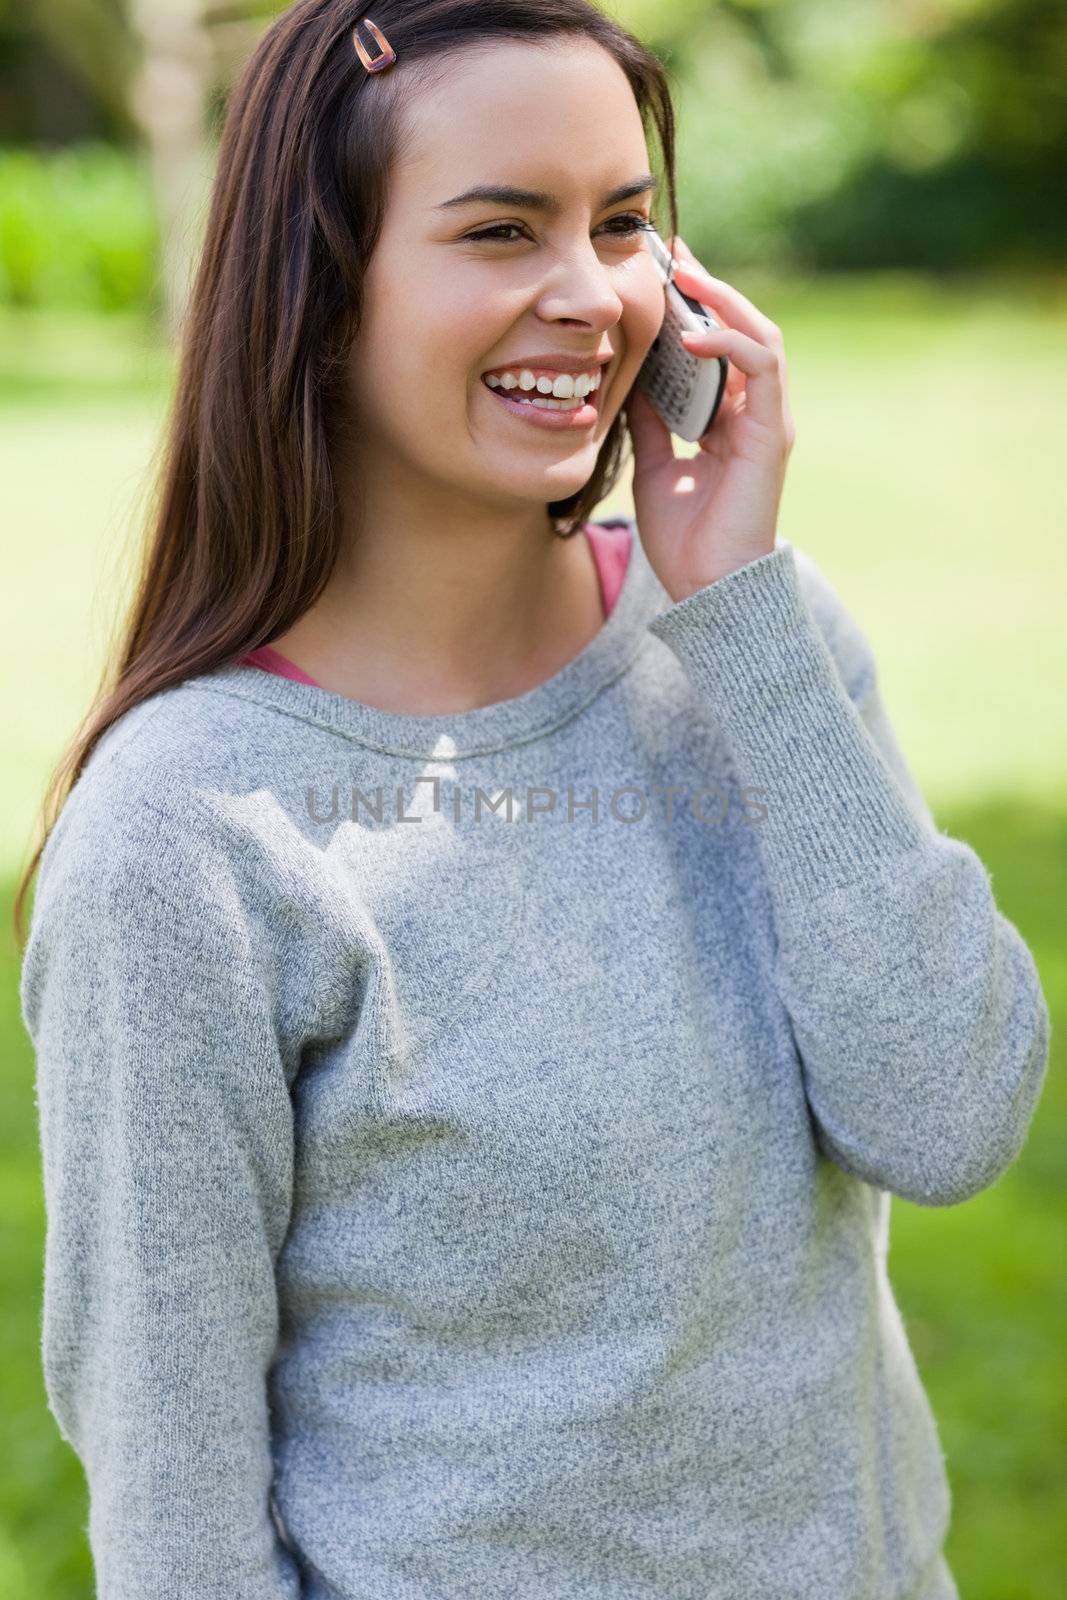 Young girl laughing while talking on the phone in a park by Wavebreakmedia